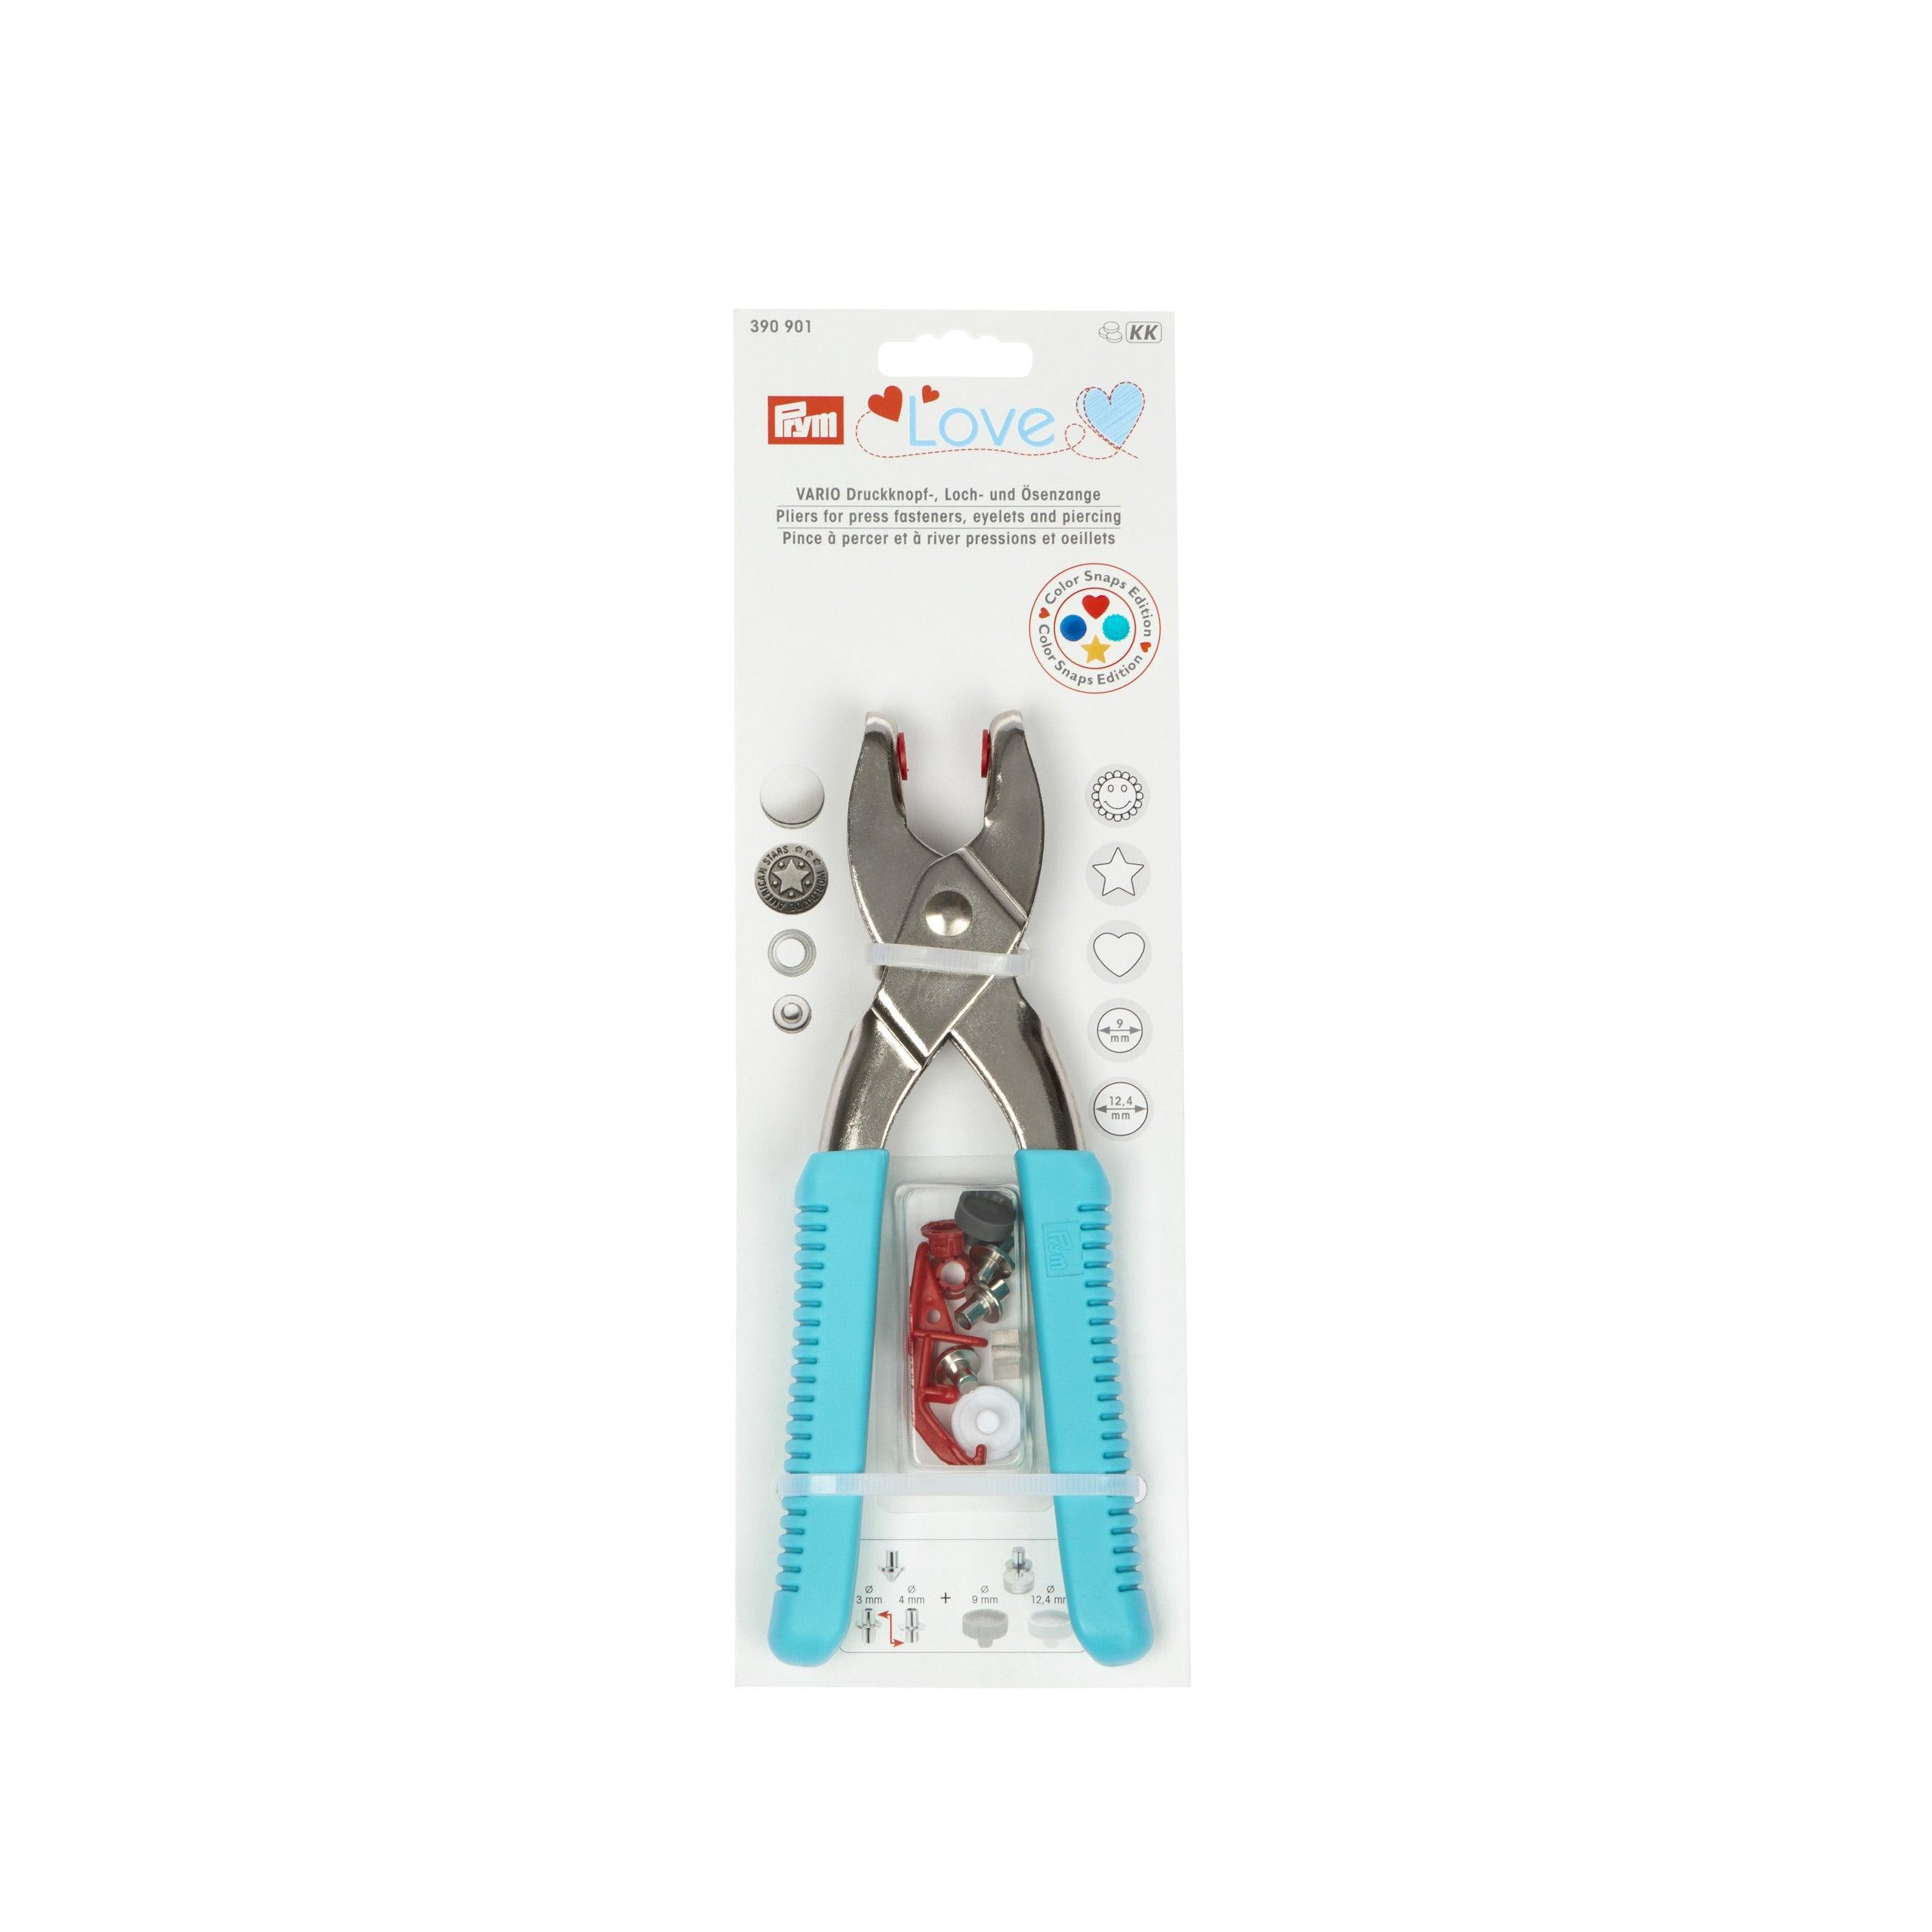 VARIO CREATIVE TOOL AND TOOL SET / ACCESSORIES A place to buy 